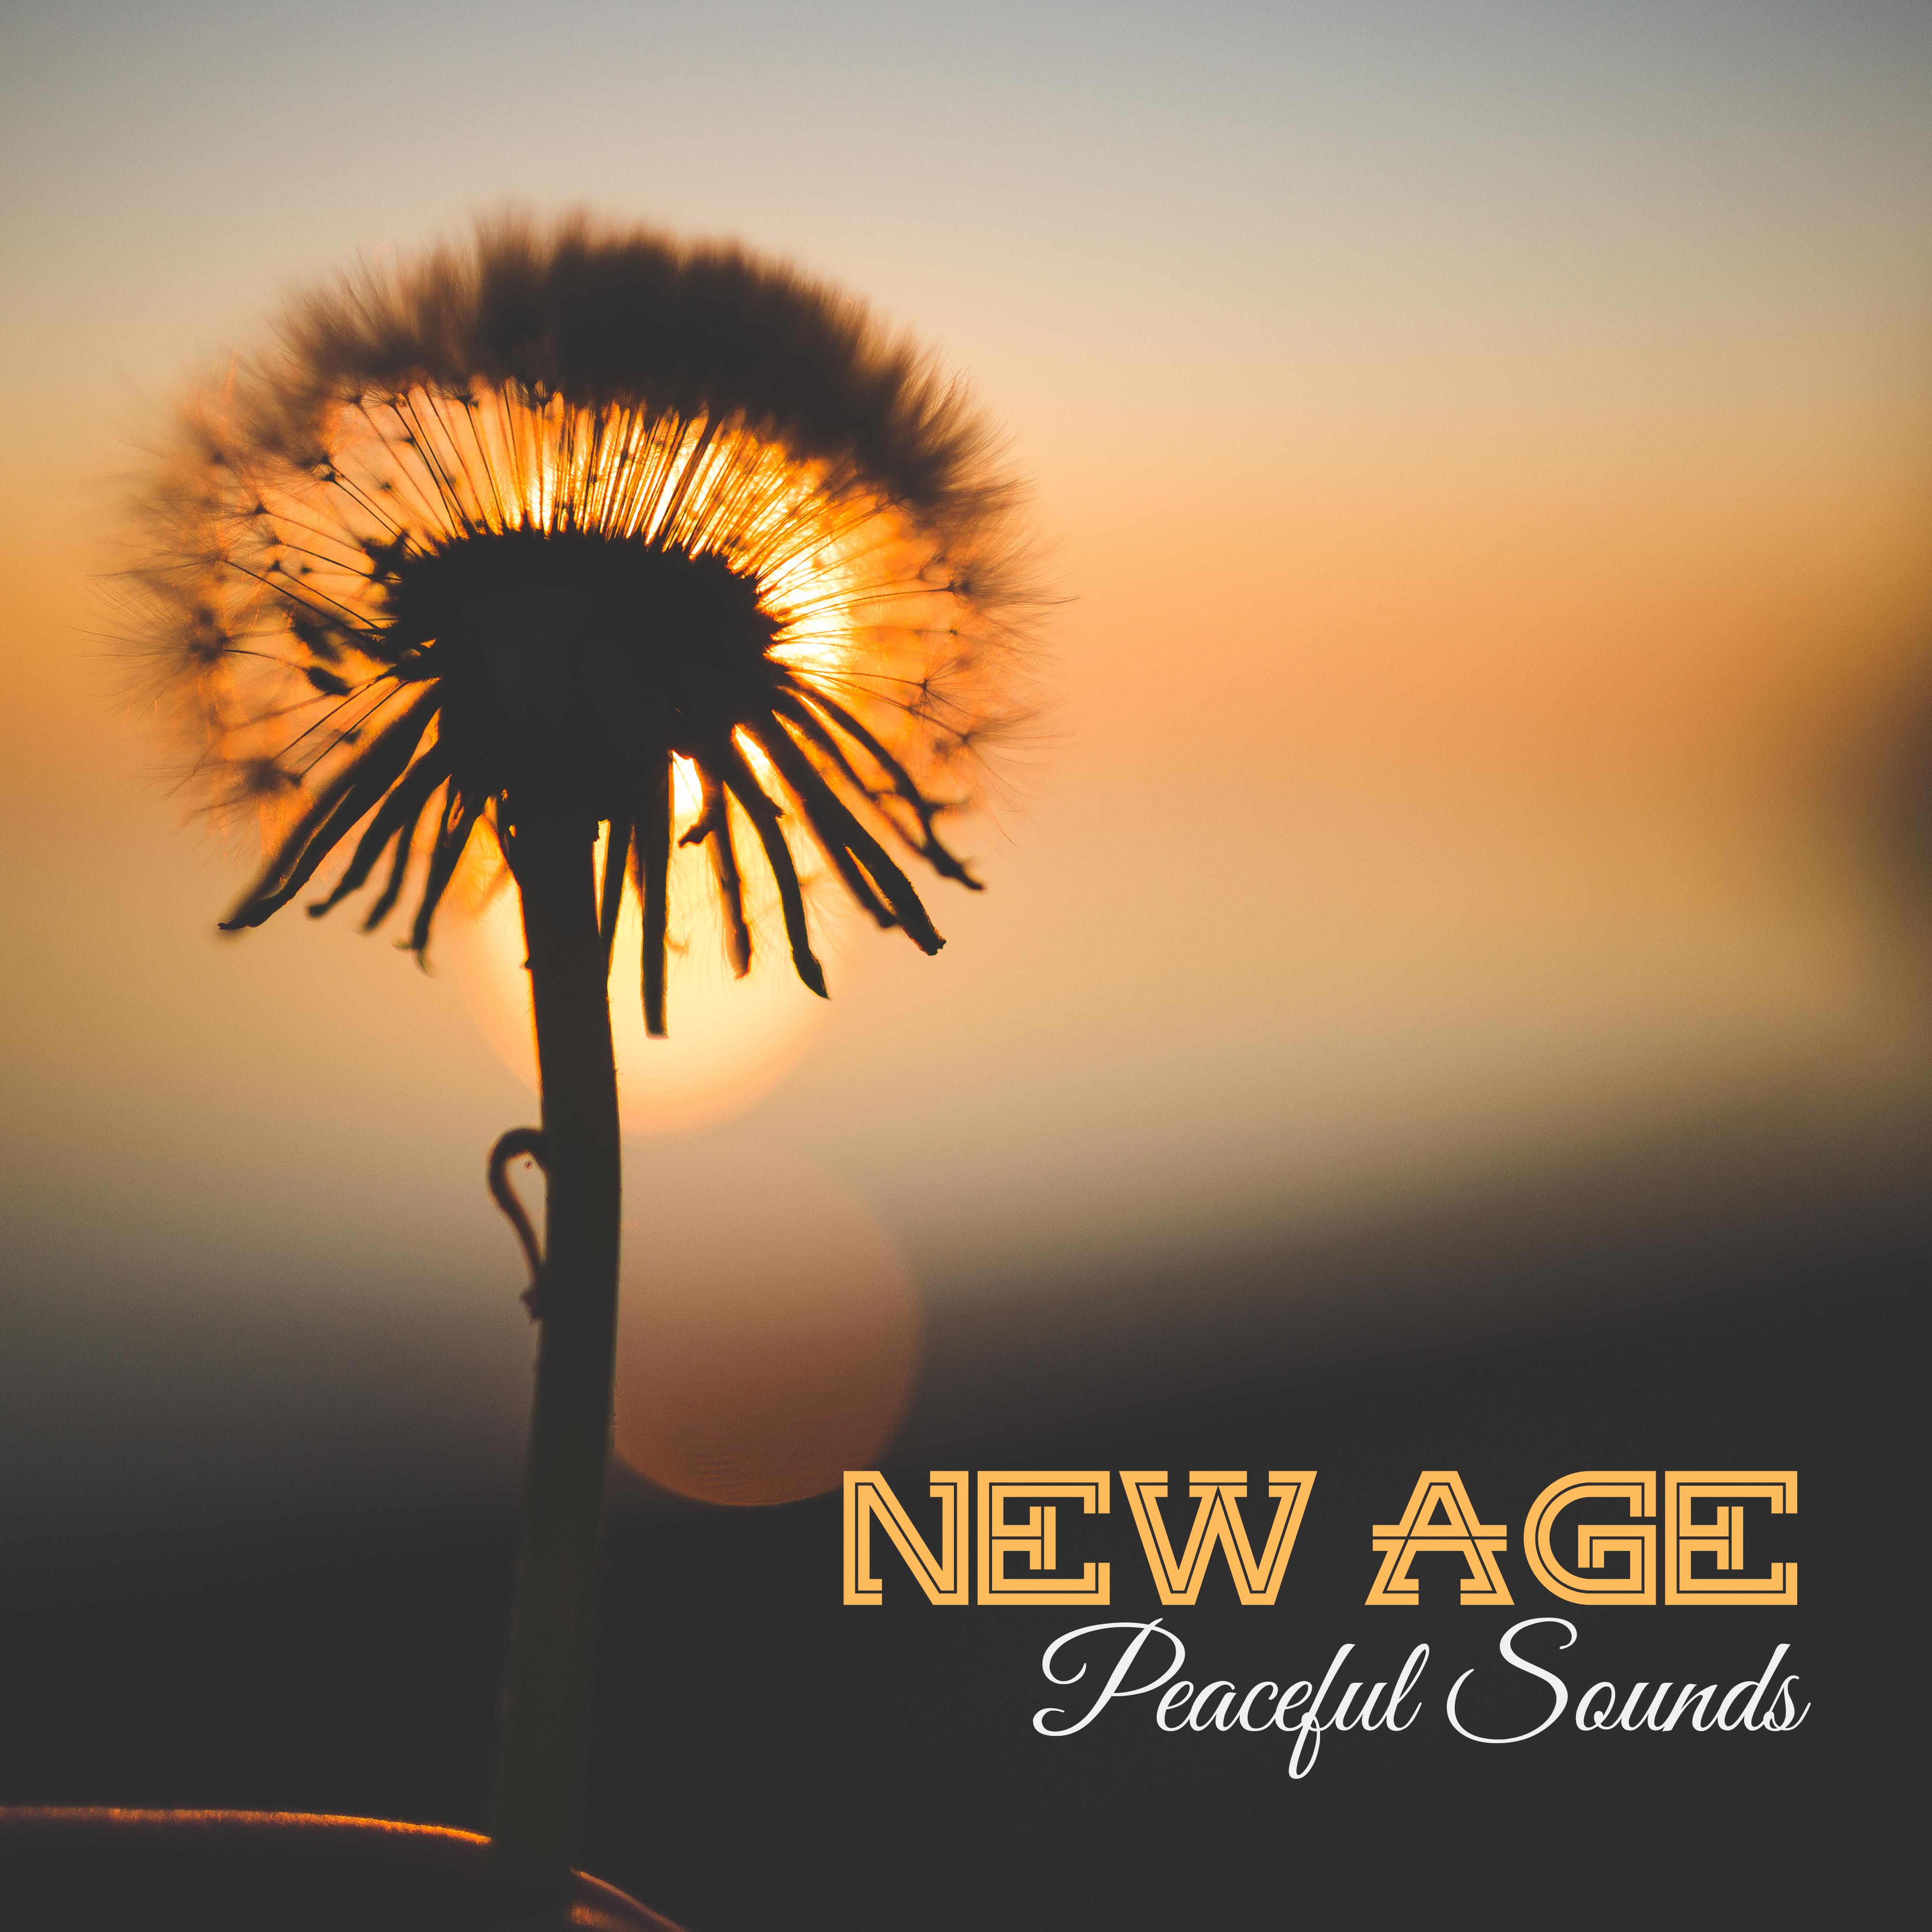 New Age Peaceful Sounds – Soothing Melodies, Nature Waves, Healing Therapy, Mind Peace